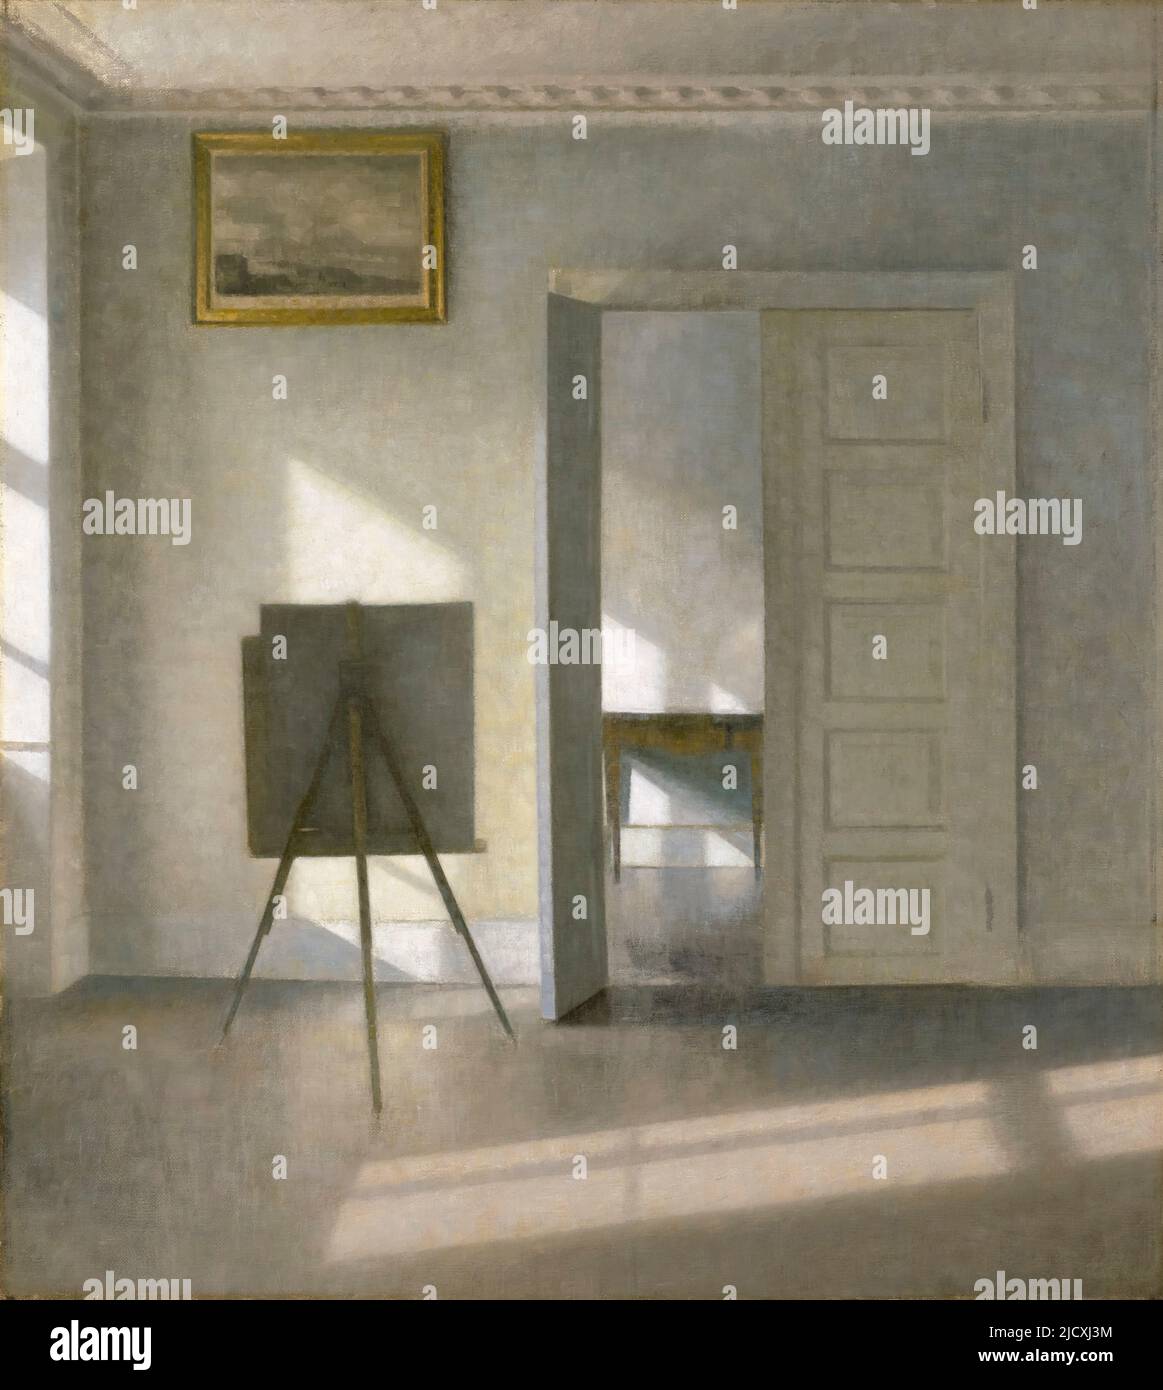 Vilhelm Hammershoi, Interior with an Easel, Bredgade 25, dipinto in olio su tela, 1912 Foto Stock